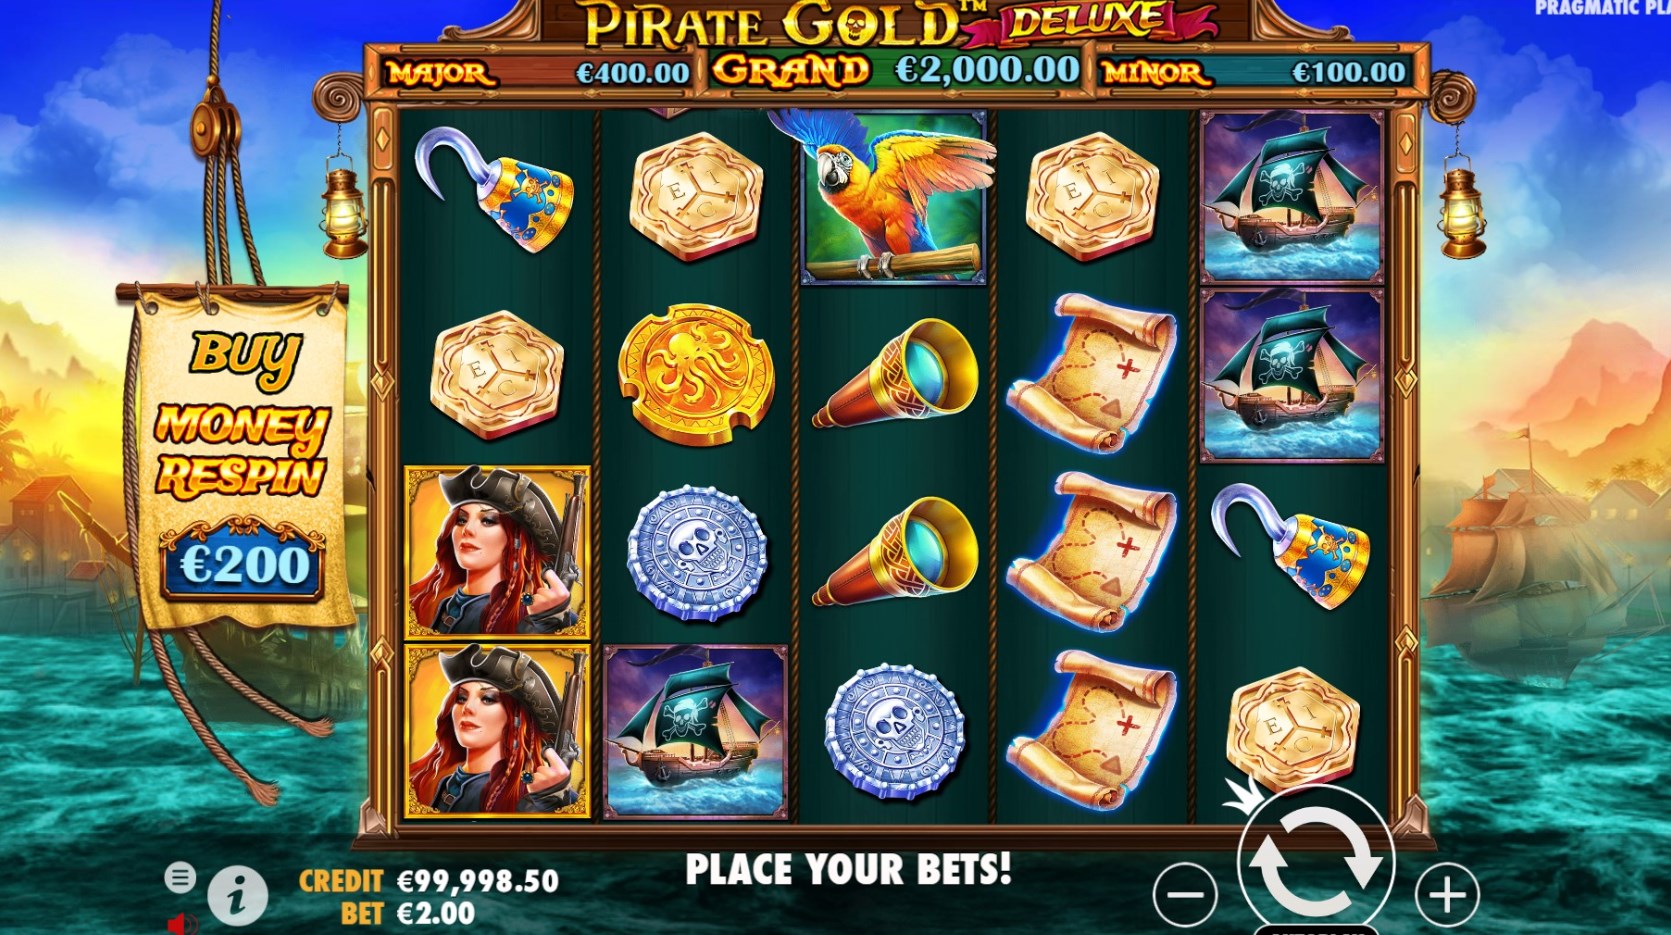 Pirate Gold Deluxe pragmatic play apk download for android  1.0.0 screenshot 3